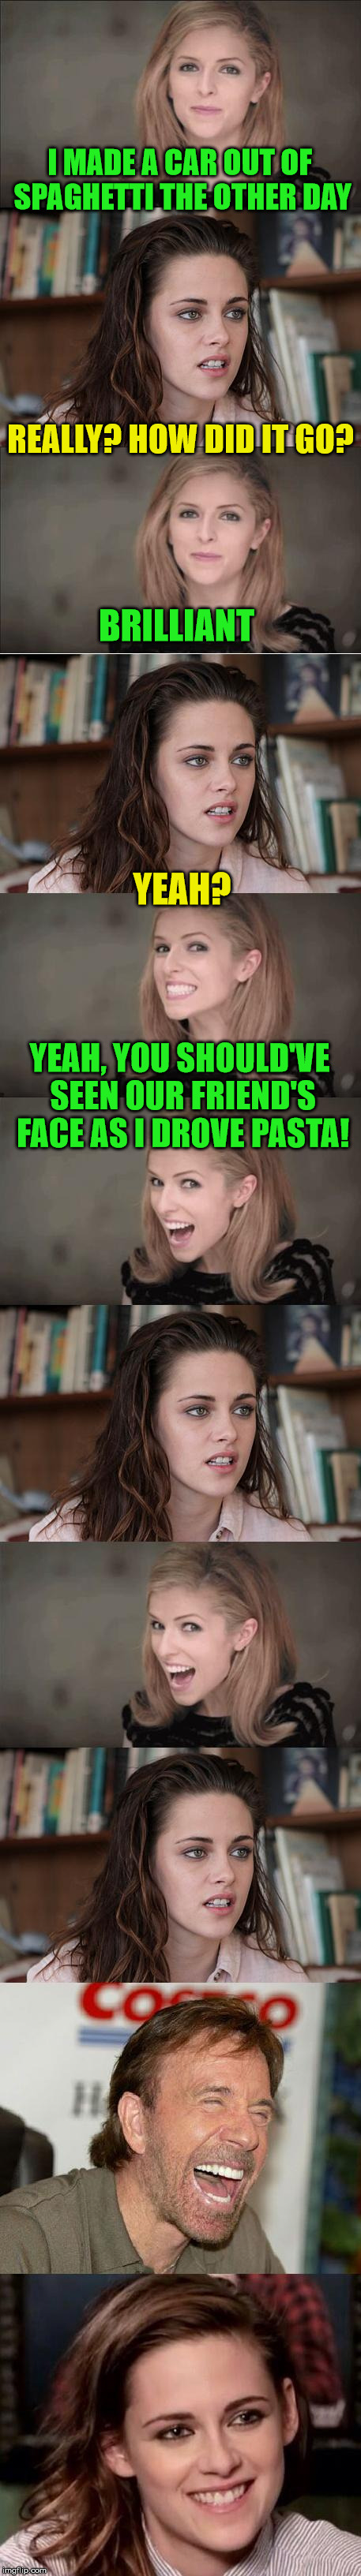 Spaghetti car | I MADE A CAR OUT OF SPAGHETTI THE OTHER DAY; BRILLIANT; REALLY? HOW DID IT GO? YEAH? YEAH, YOU SHOULD'VE SEEN OUR FRIEND'S FACE AS I DROVE PASTA! | image tagged in memes,car,spaghetti,pasta,friend,reaction | made w/ Imgflip meme maker